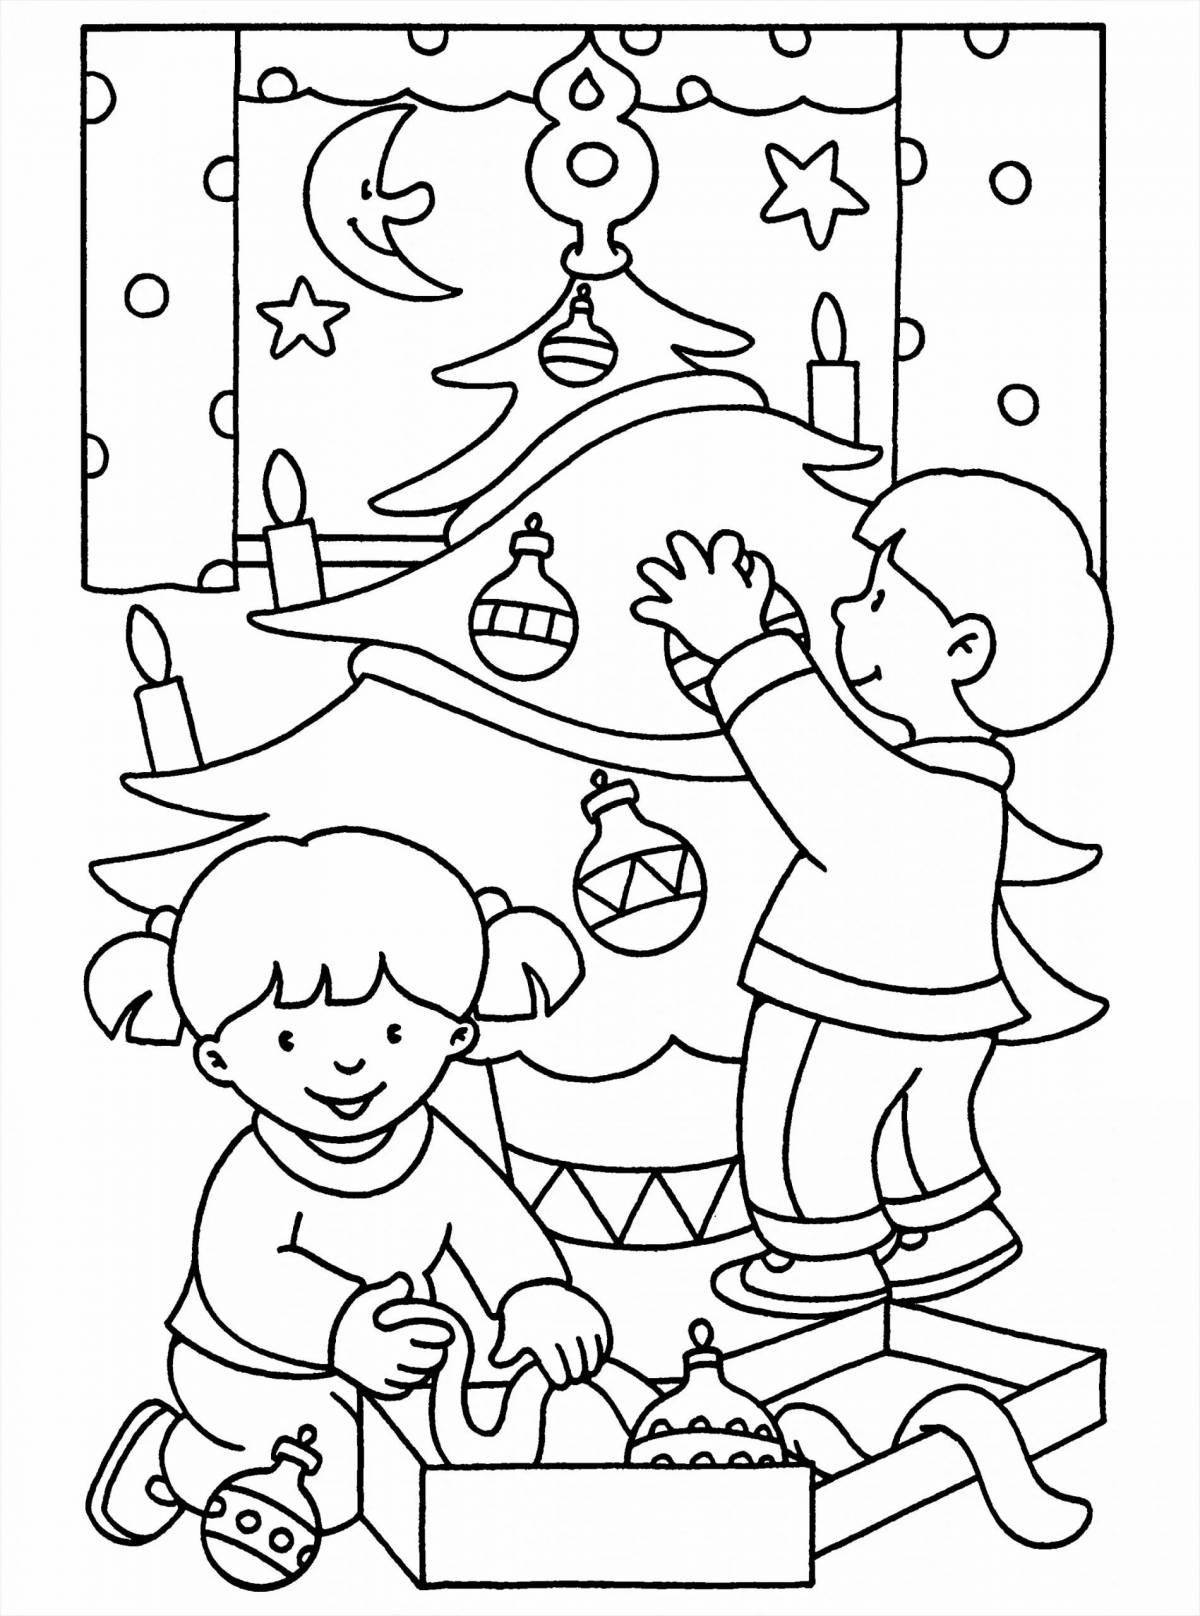 Children's Christmas playful coloring